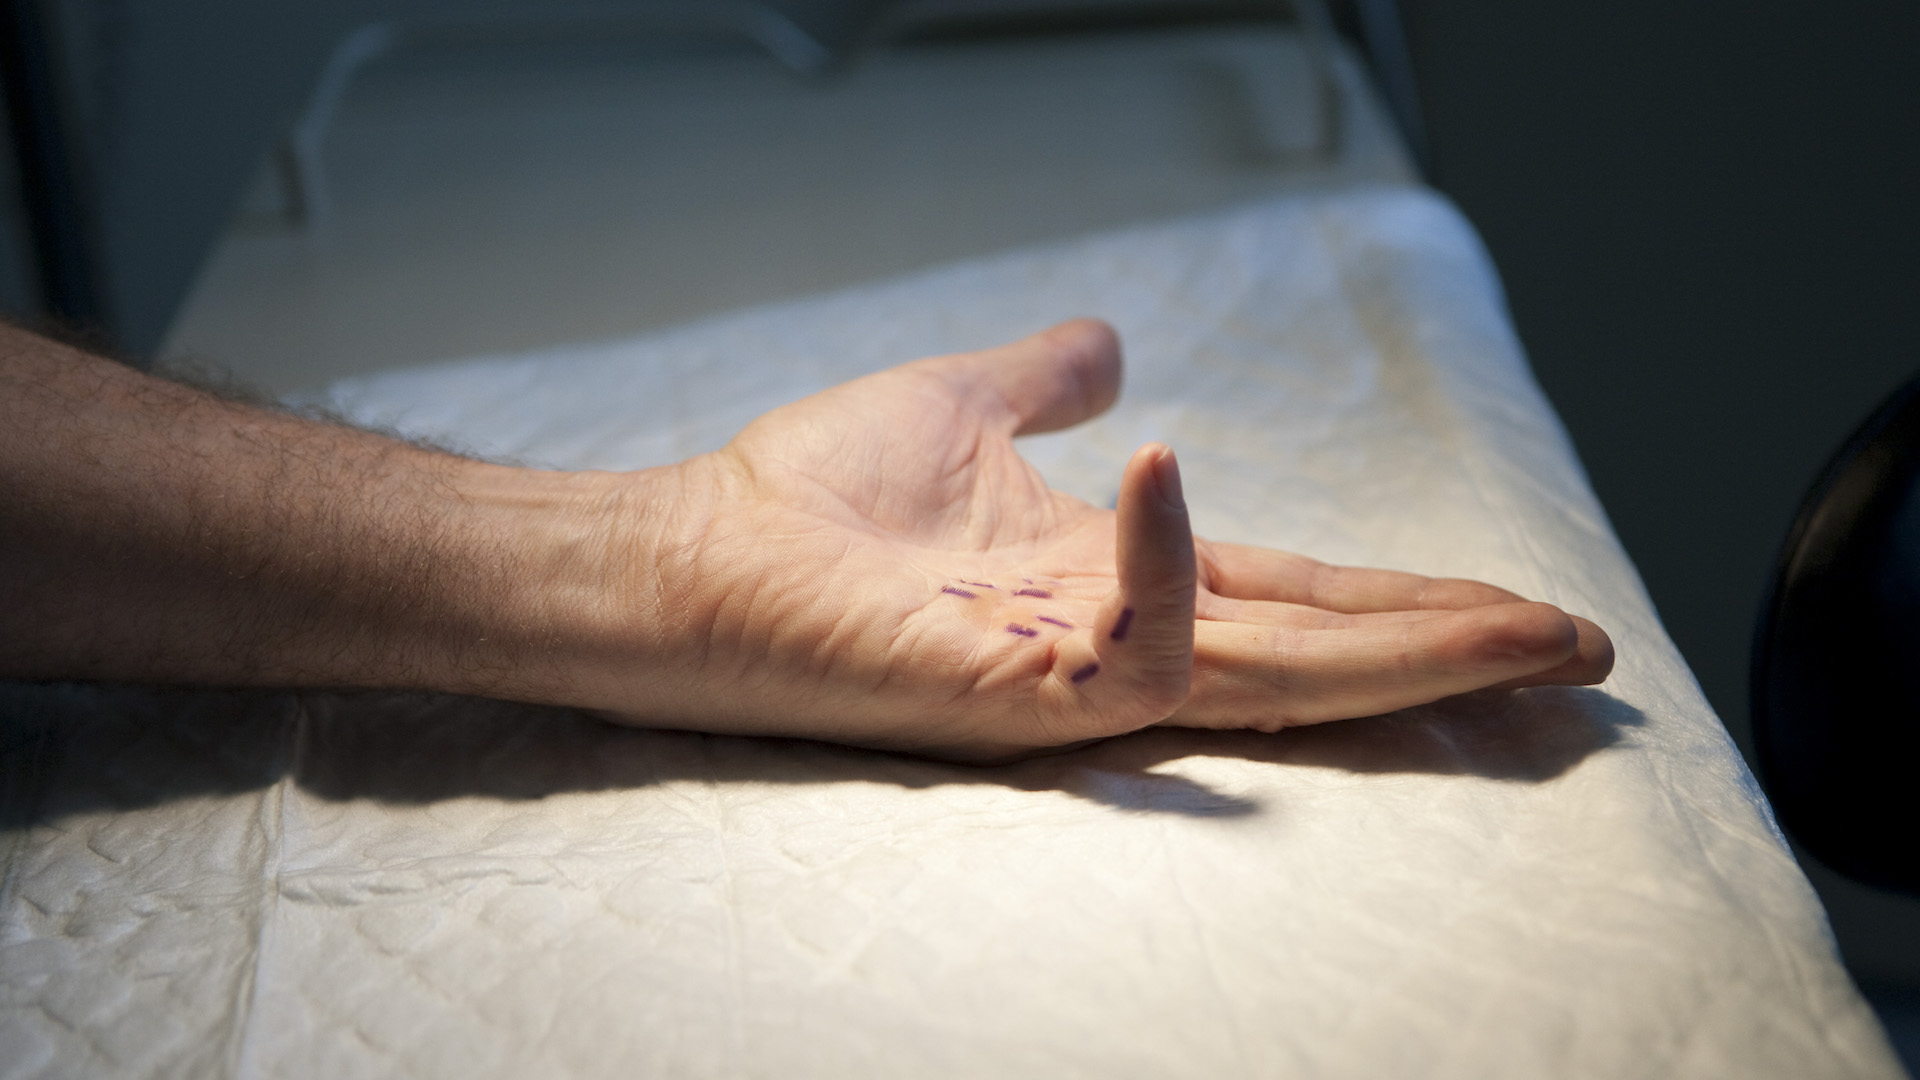 A photograph of a hand with Dupuytren's disease, causing their pinky to be contracted.